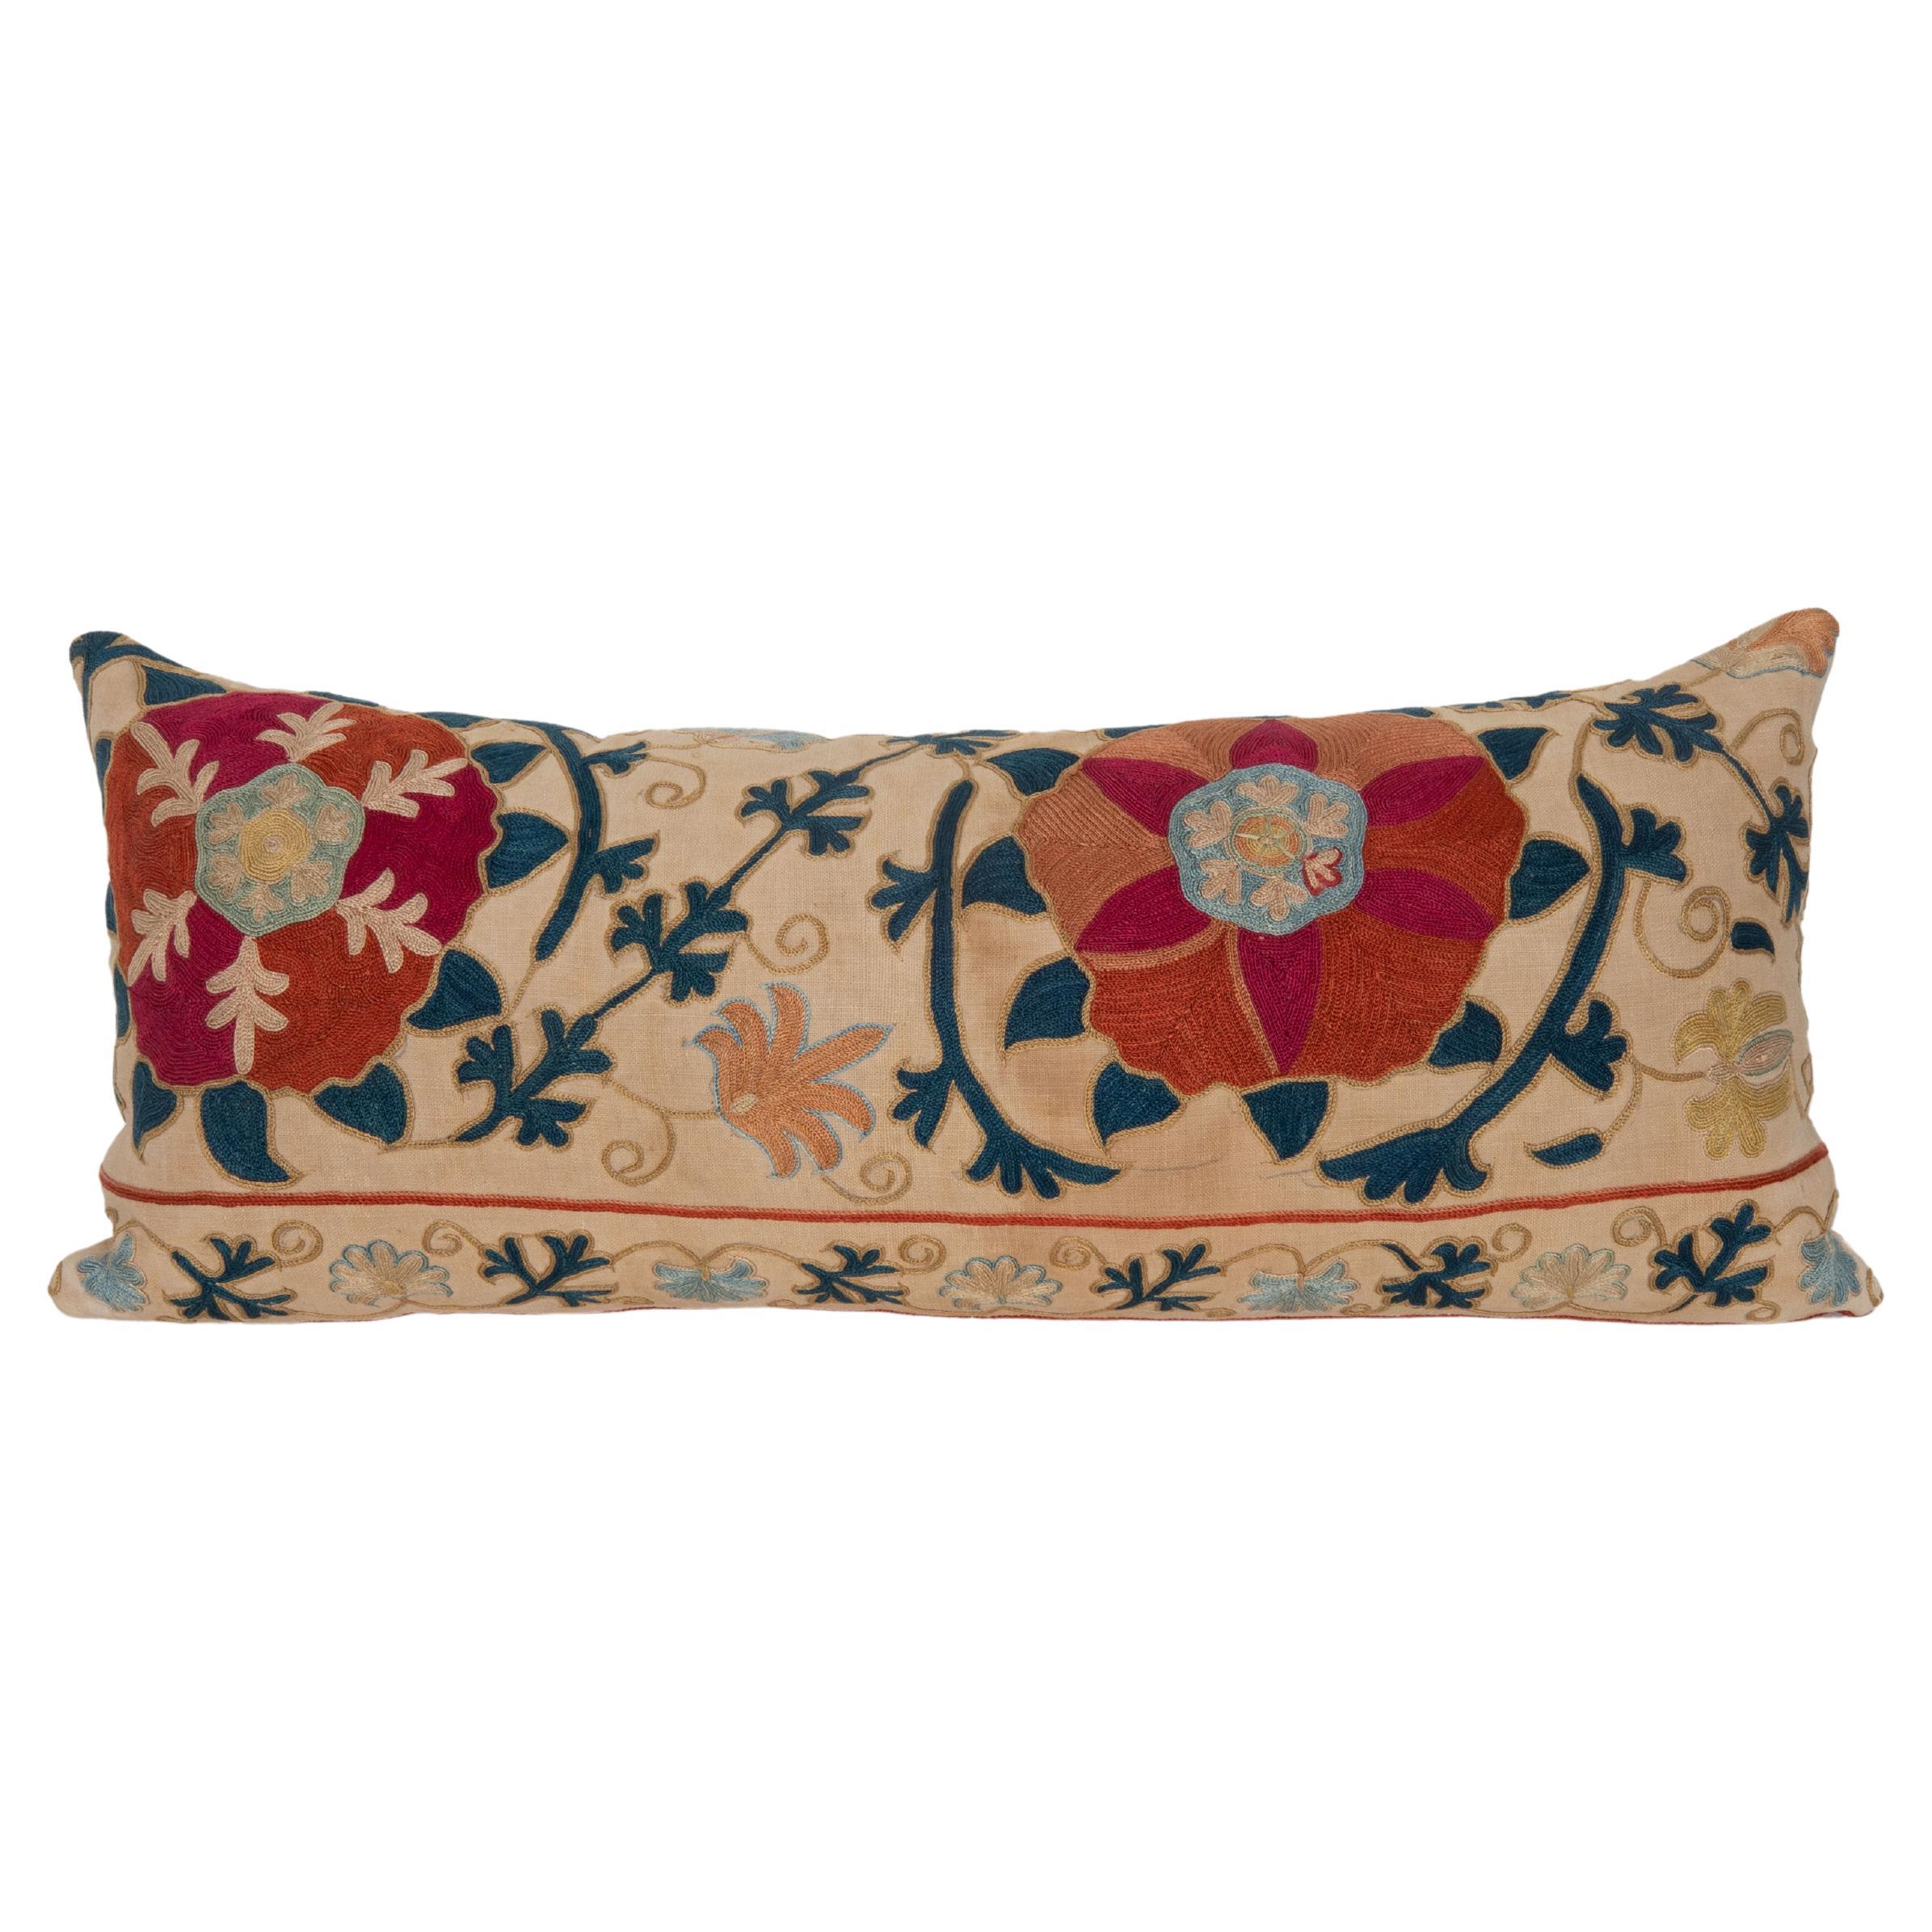 Antique pillow Made from a 19th C. Suzani Fragment